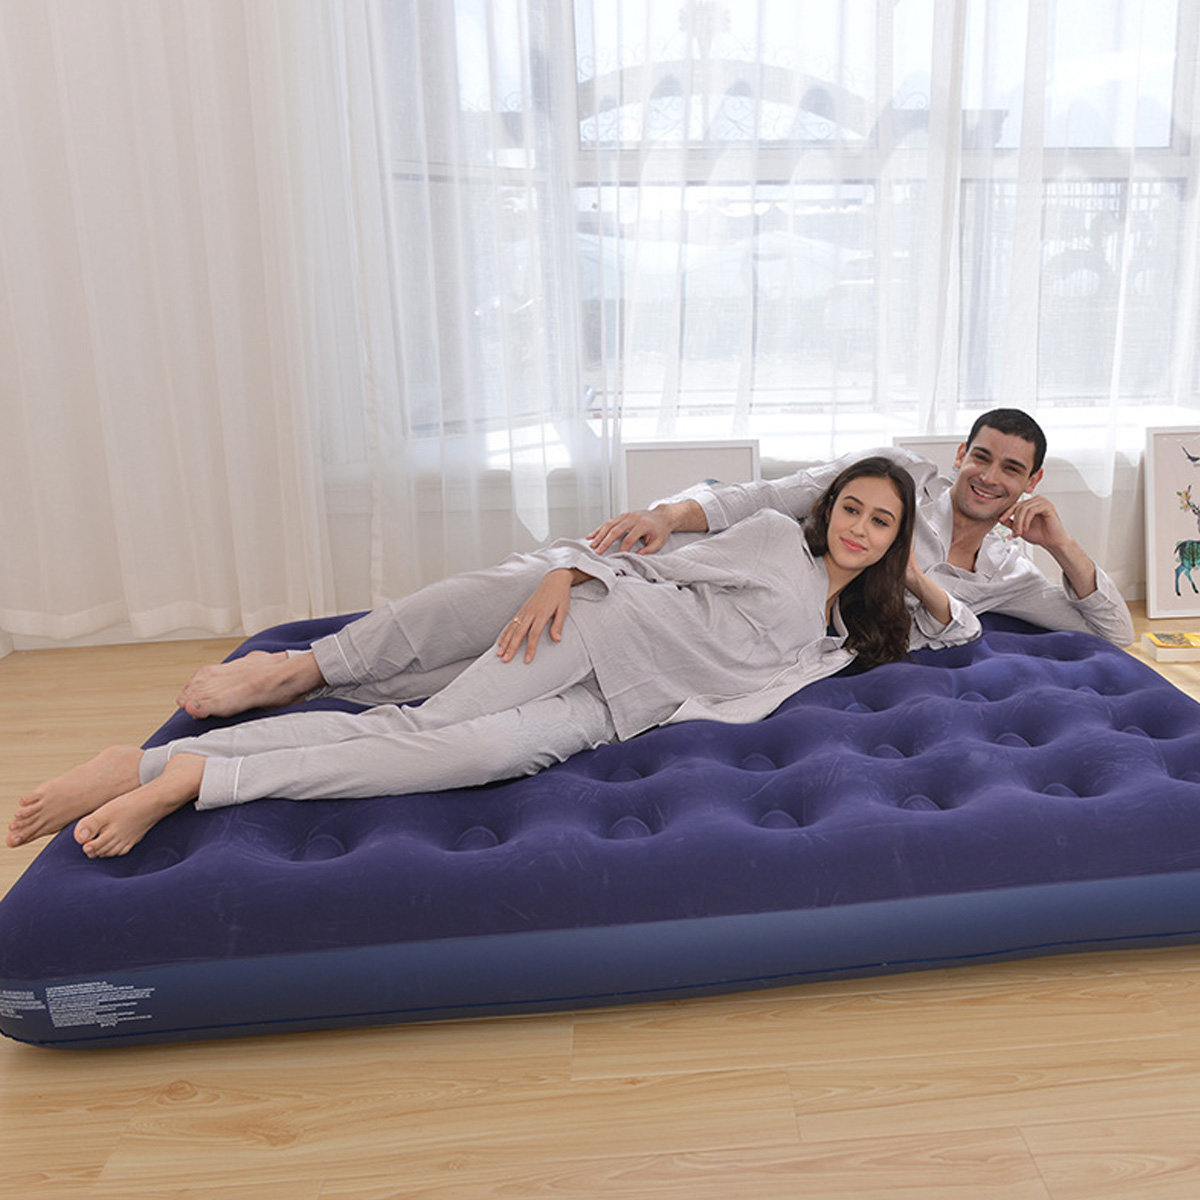 PVC-Inflatable-Bed-Inflatable-Mattress-Air-Mattress-Bed-Single-Double-Wide-Soft-Mattress-Comfortable-1842780-11